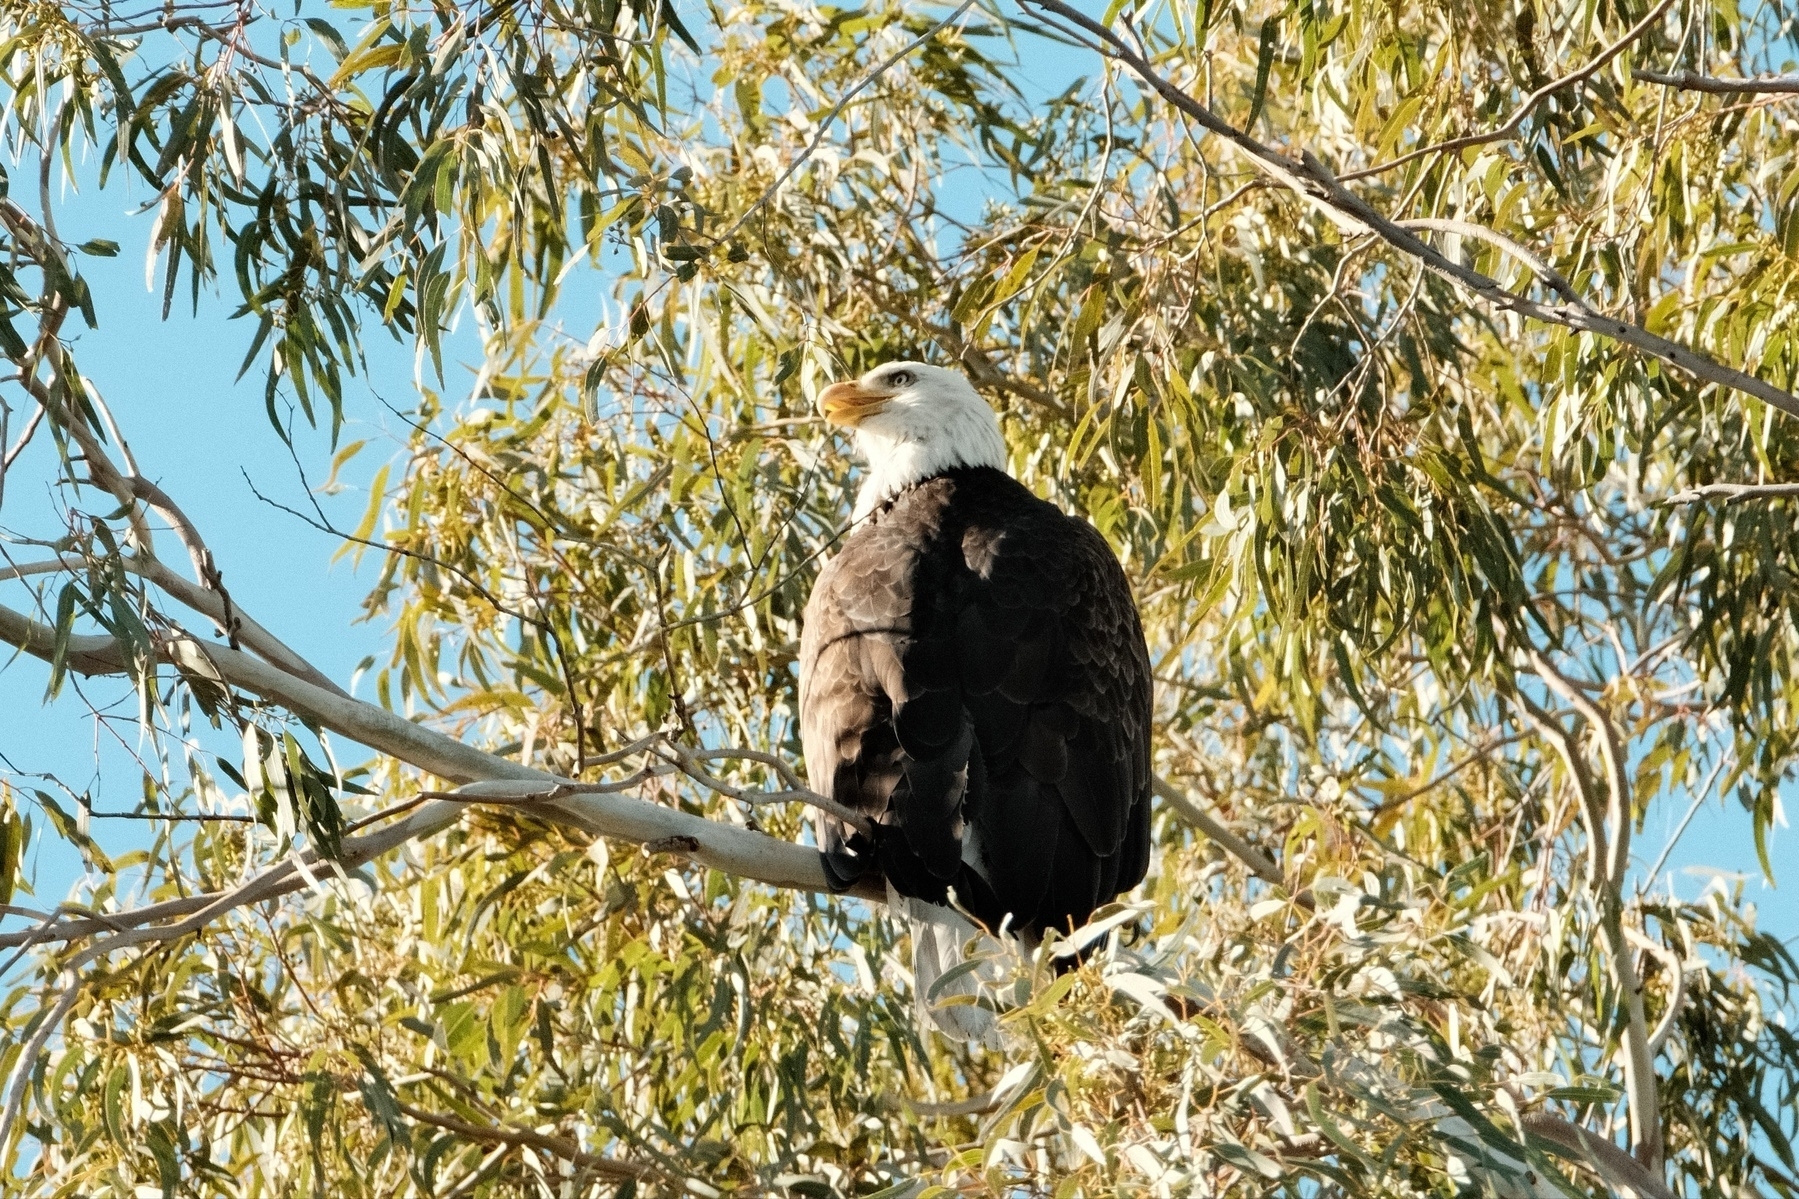 Bald eagle, looking left across its left shoulder, perched on a Willow tree branch surrounded by foliage.